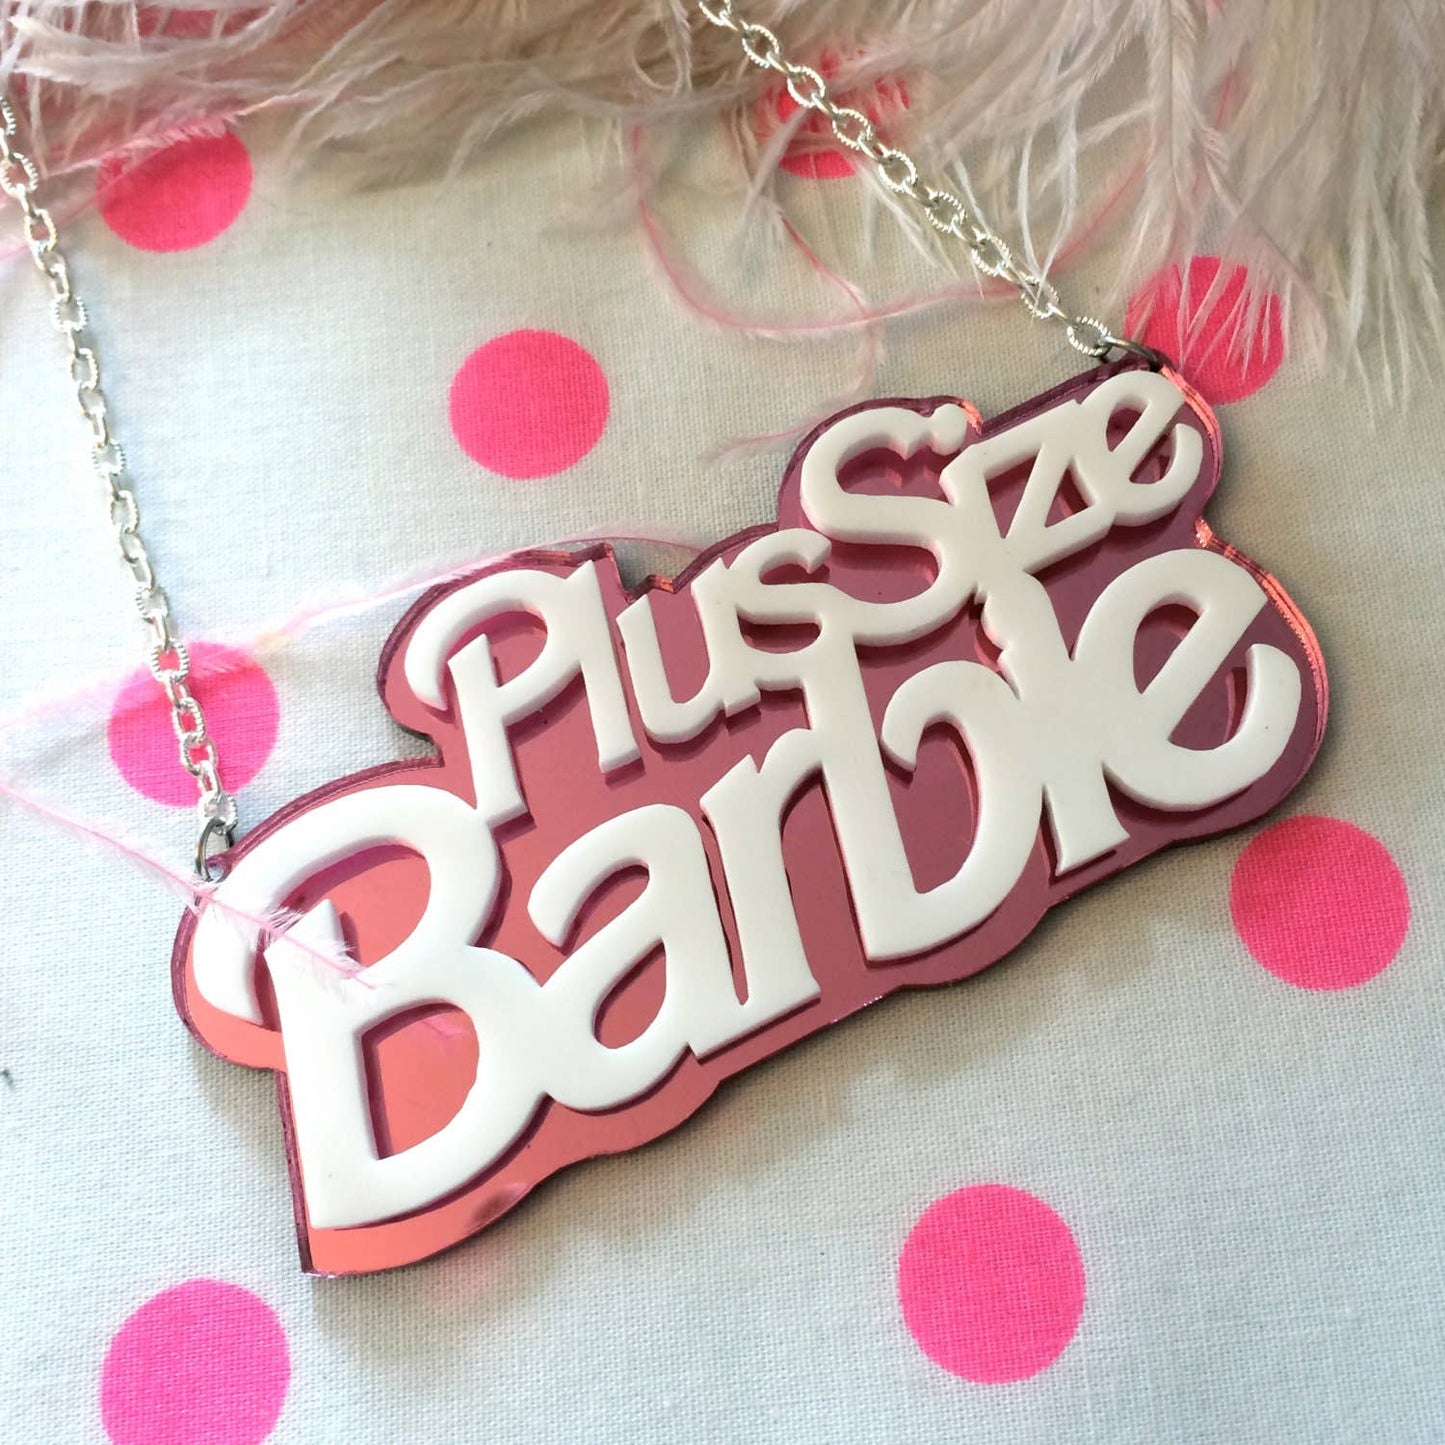 I'm Your Present - Plus Size Barbie Acrylic Necklace In Pink Mirror And White, Laser Cut Acrylic, Plastic Jewelry